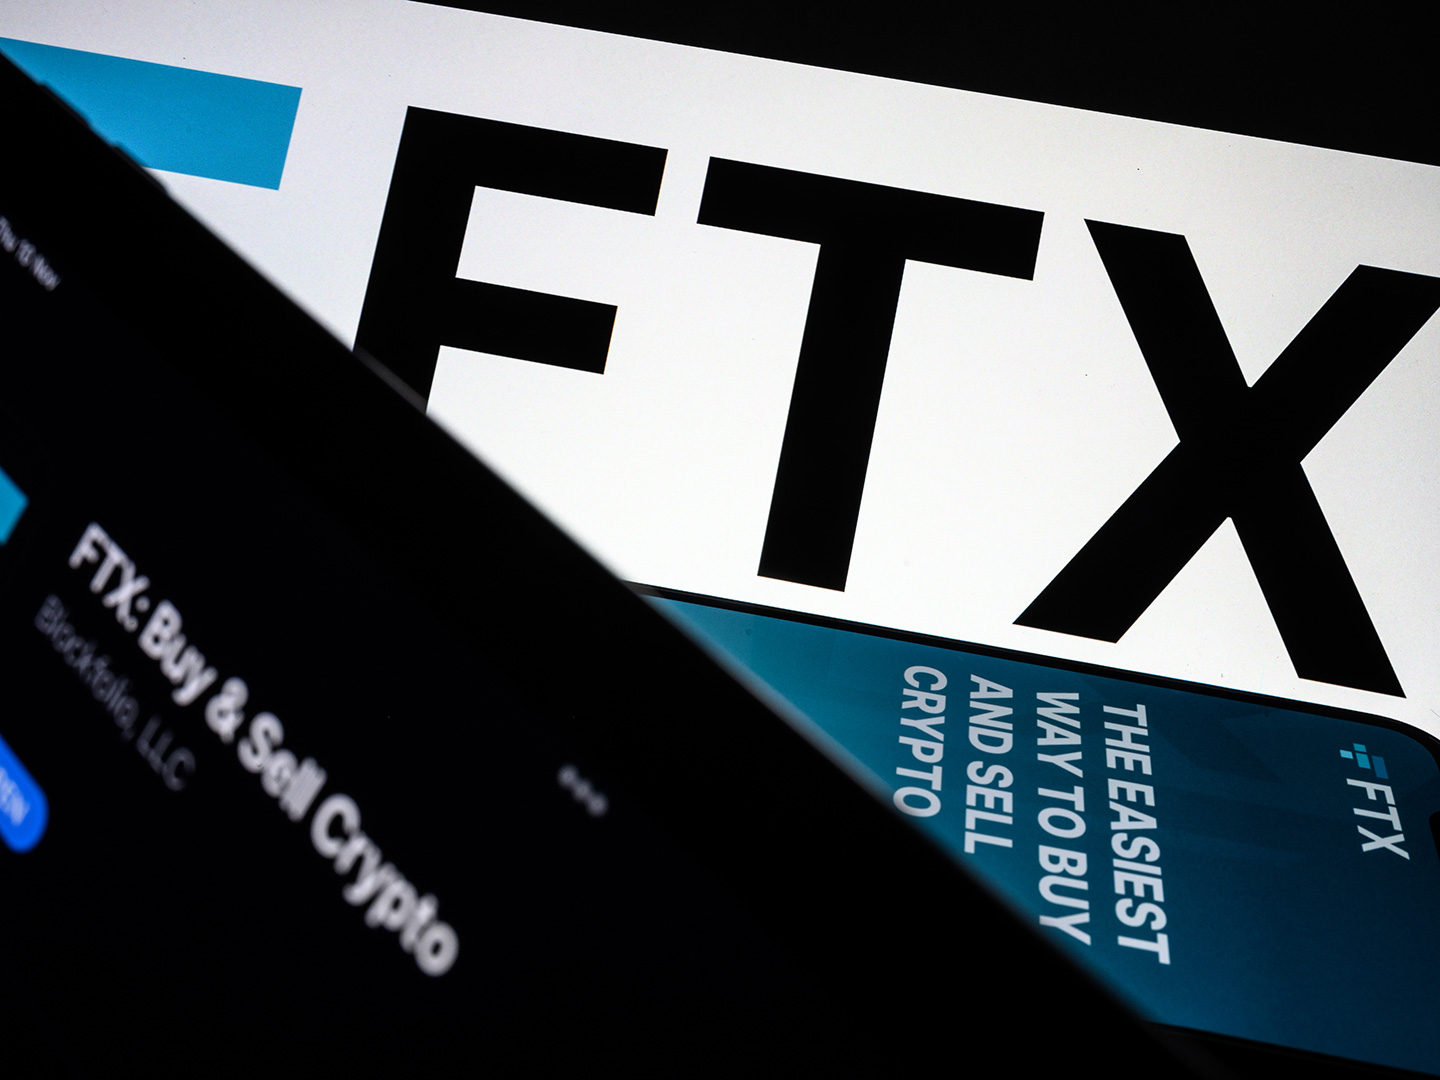 Let’s move on from FTX’s collapse and get back to the basics